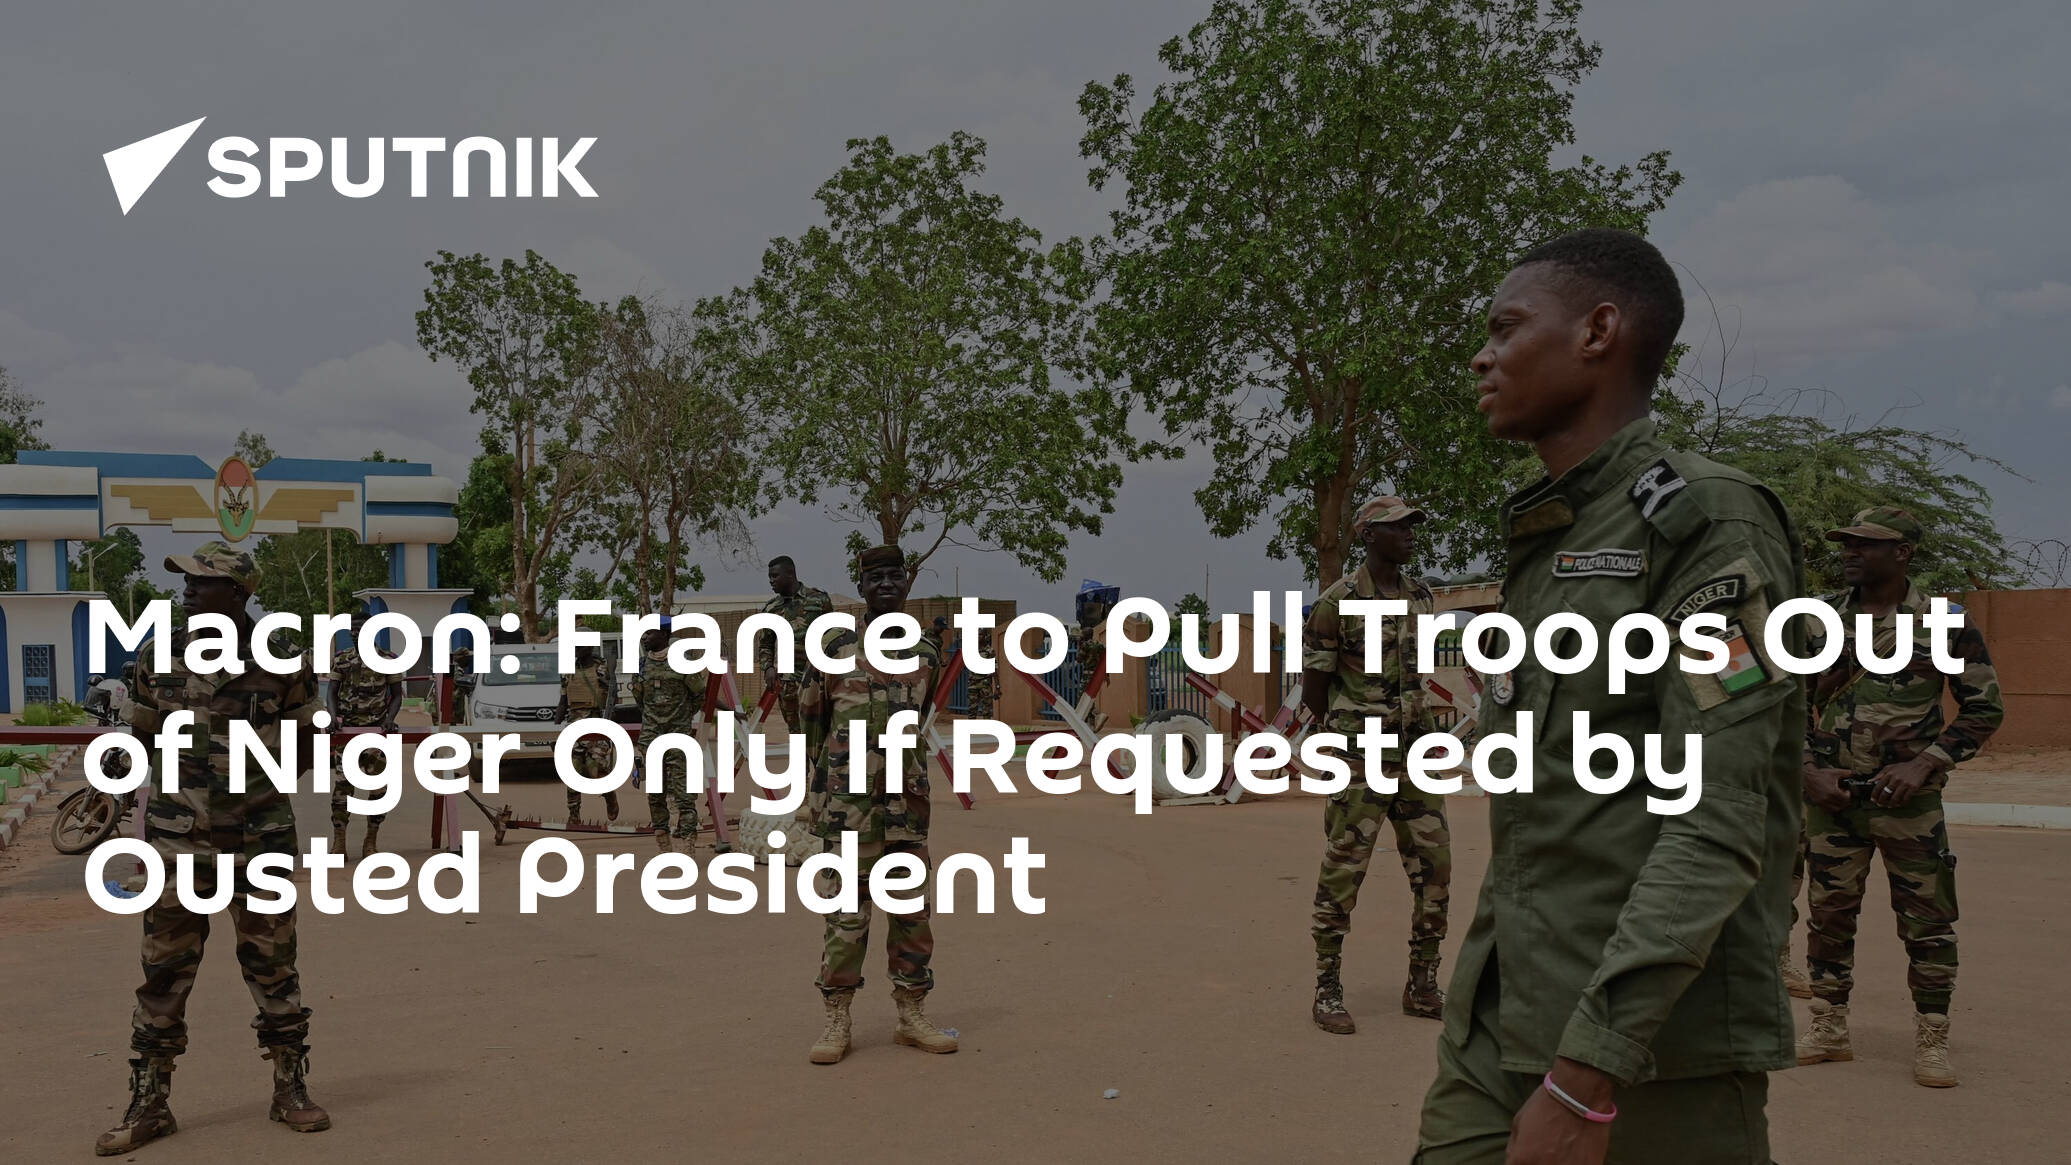 Macron: France to Pull Troops Out of Niger Only If Requested by Ousted President